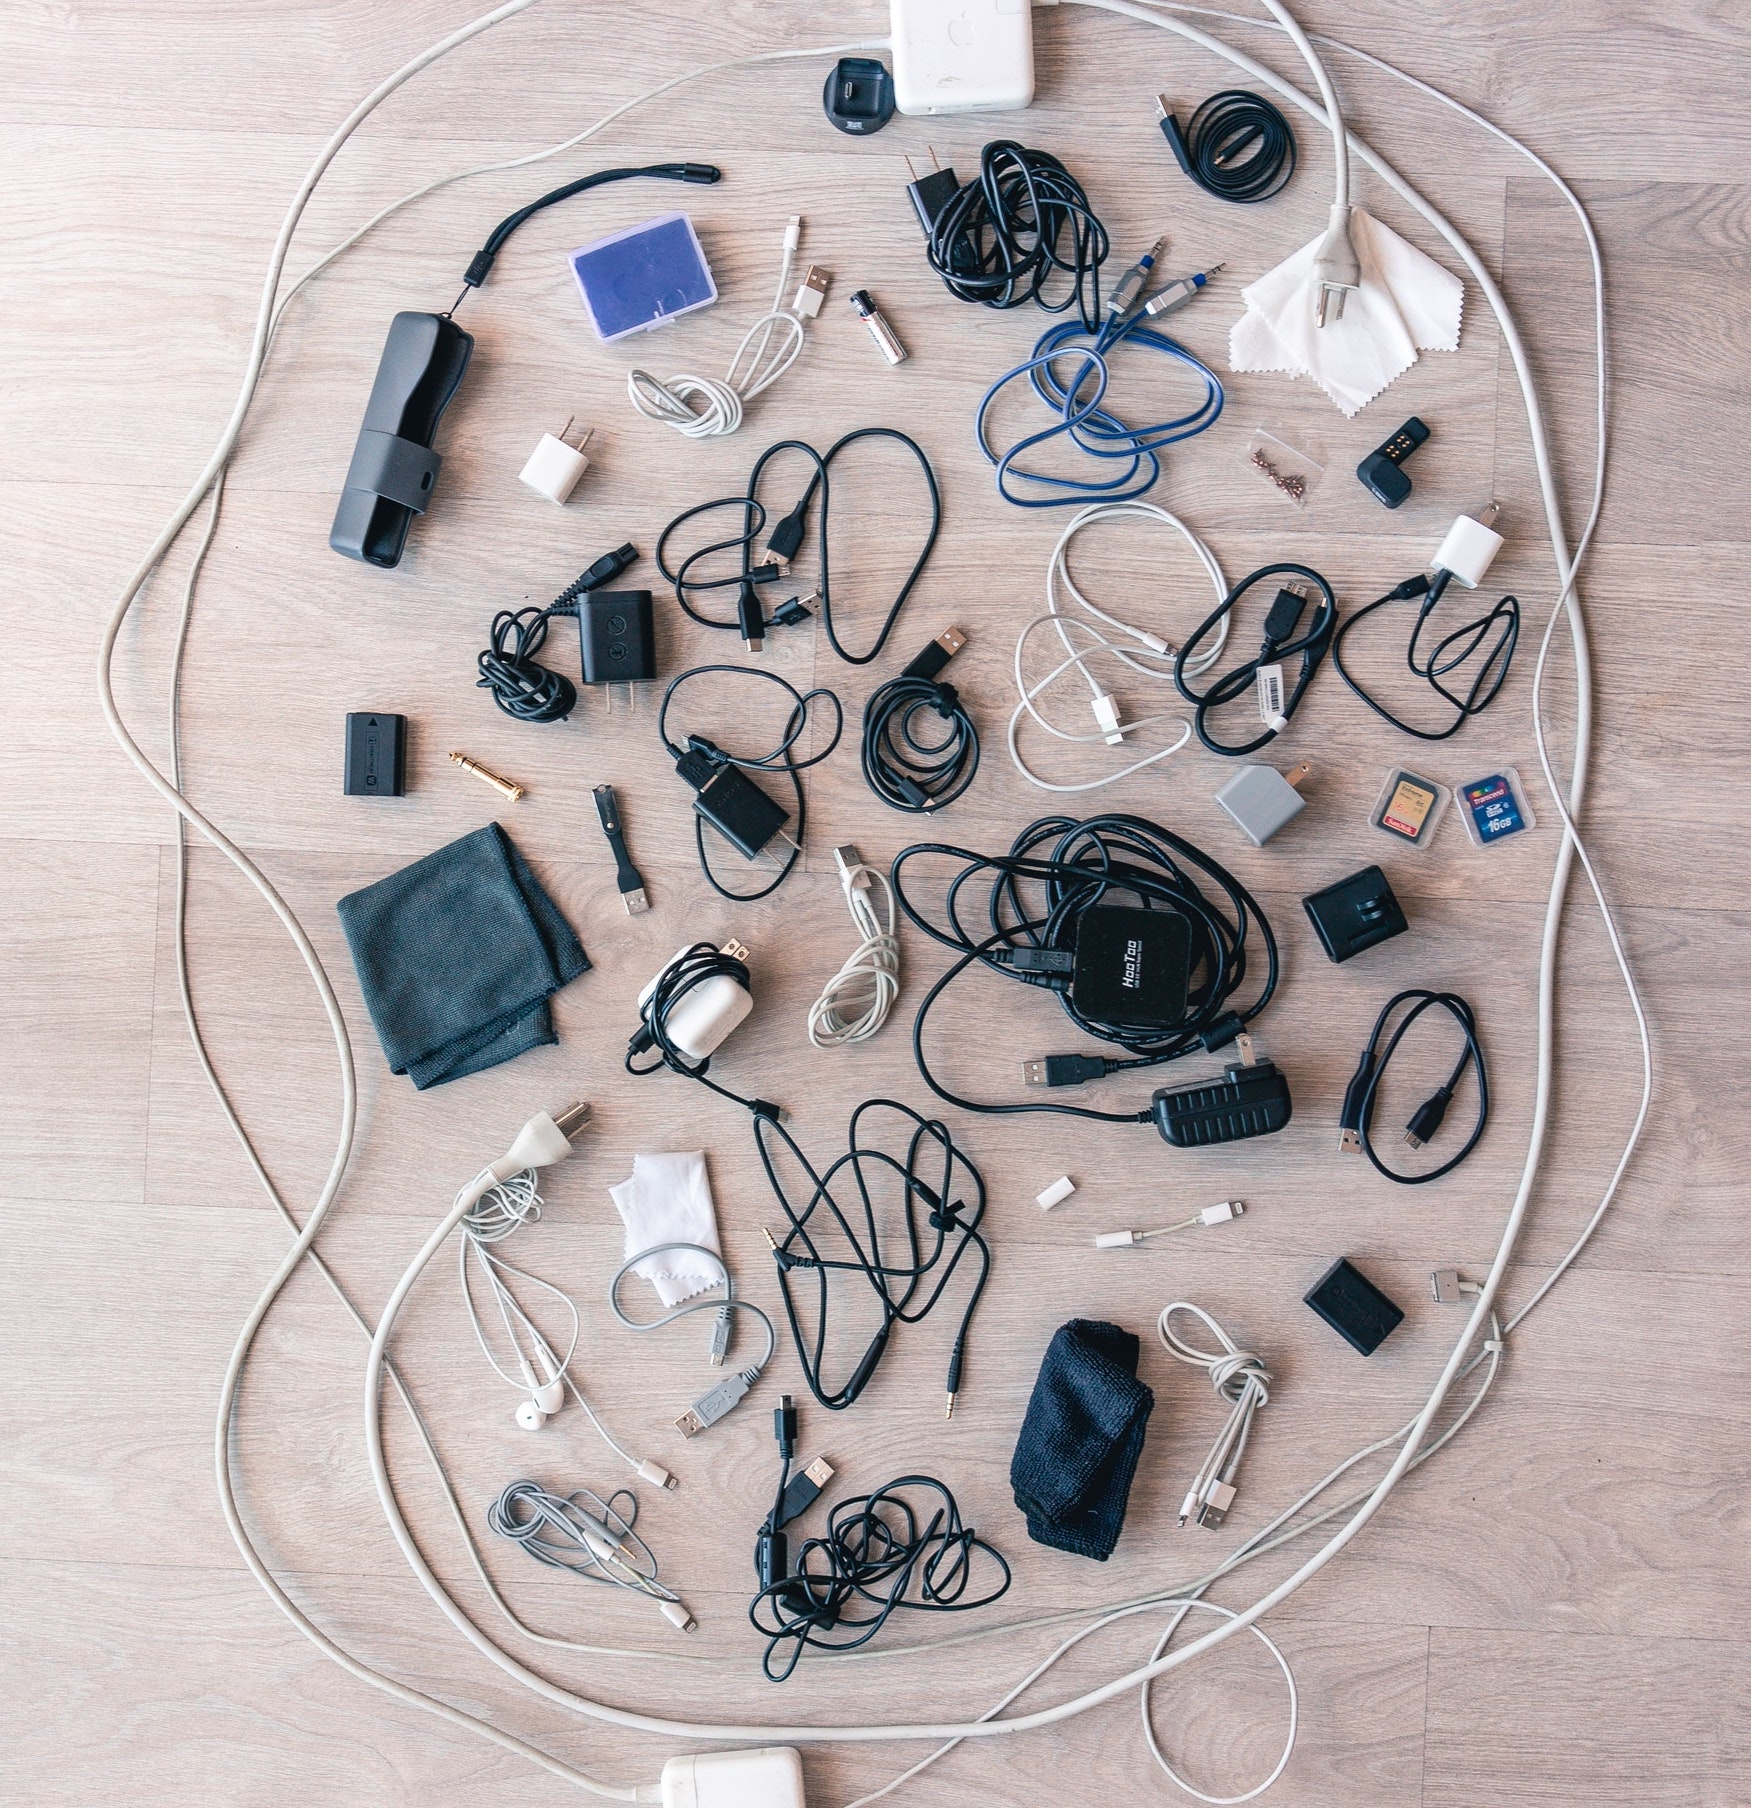 How To Organise Cables, Cords & Wires Under Desks